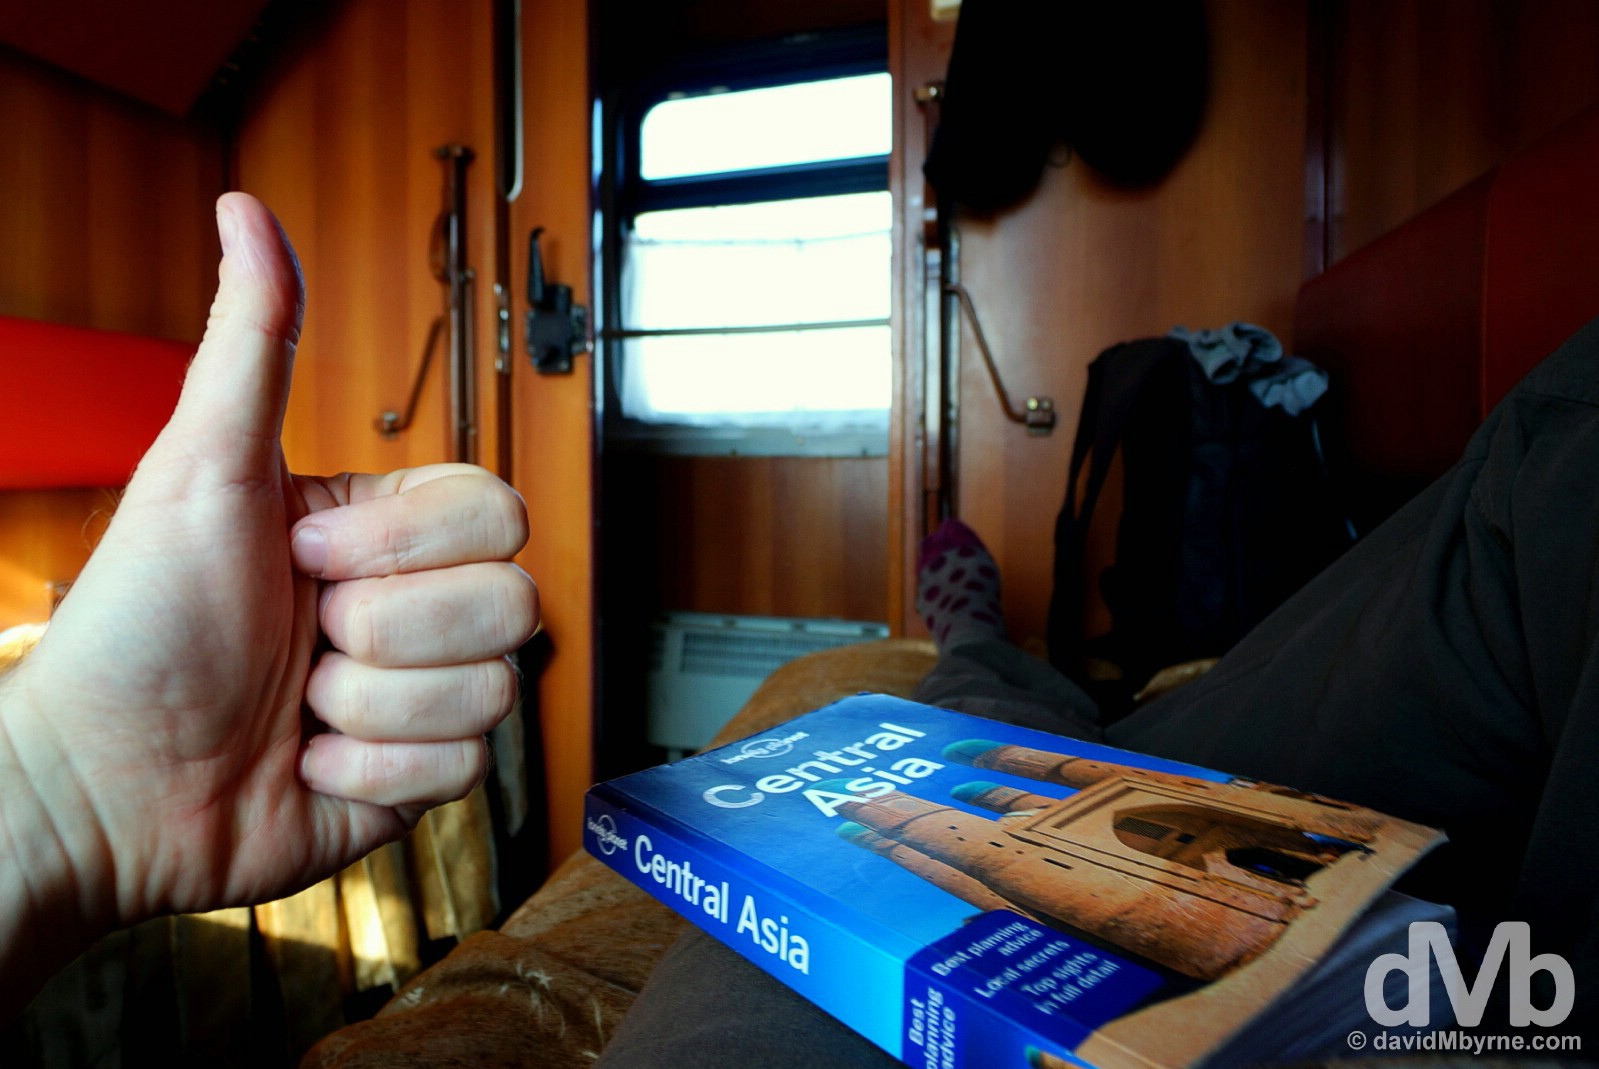 A big thumbs up to Central Asia on the overnight train from Urgench to Tashkent, Uzbekistan. March 17, 2015. 